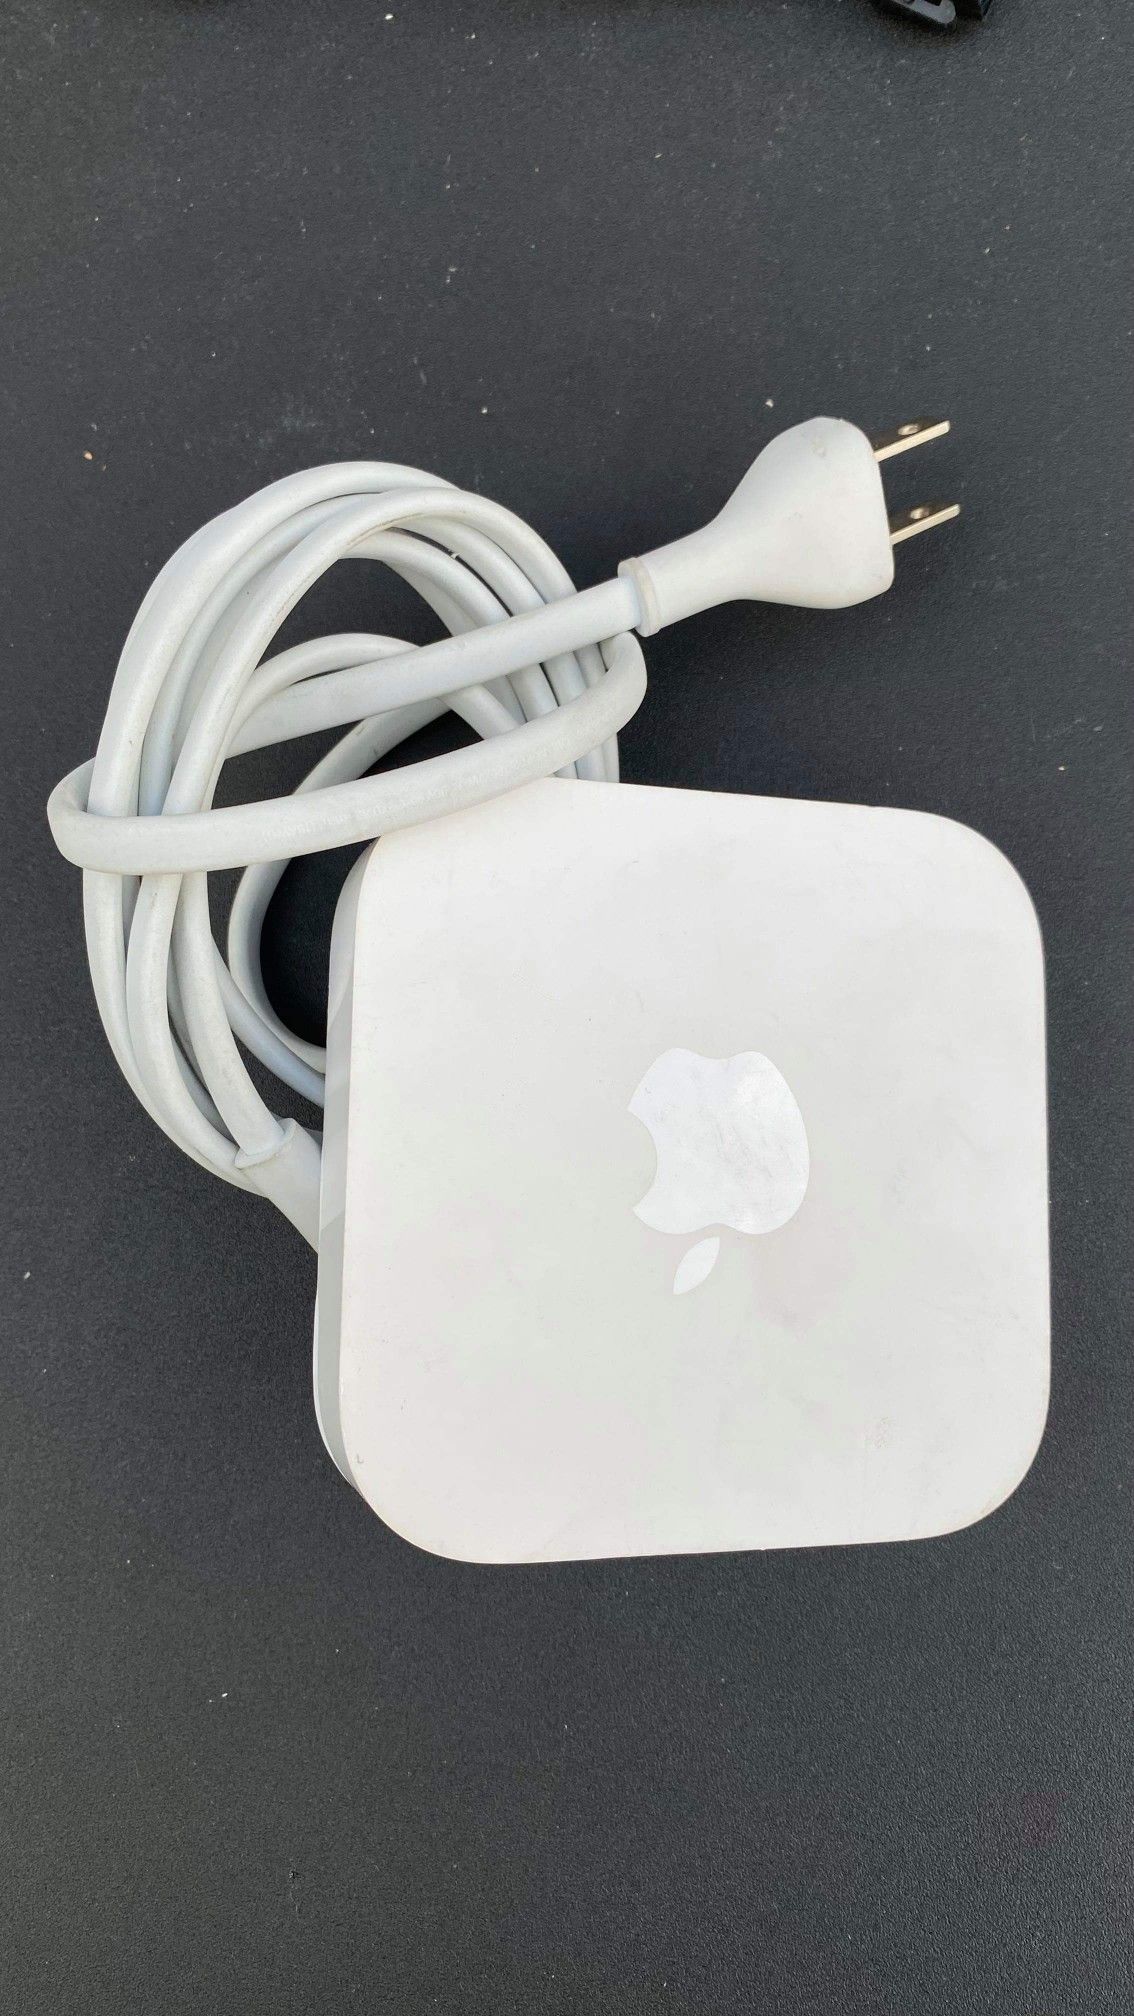 Apple Wi-Fi Router